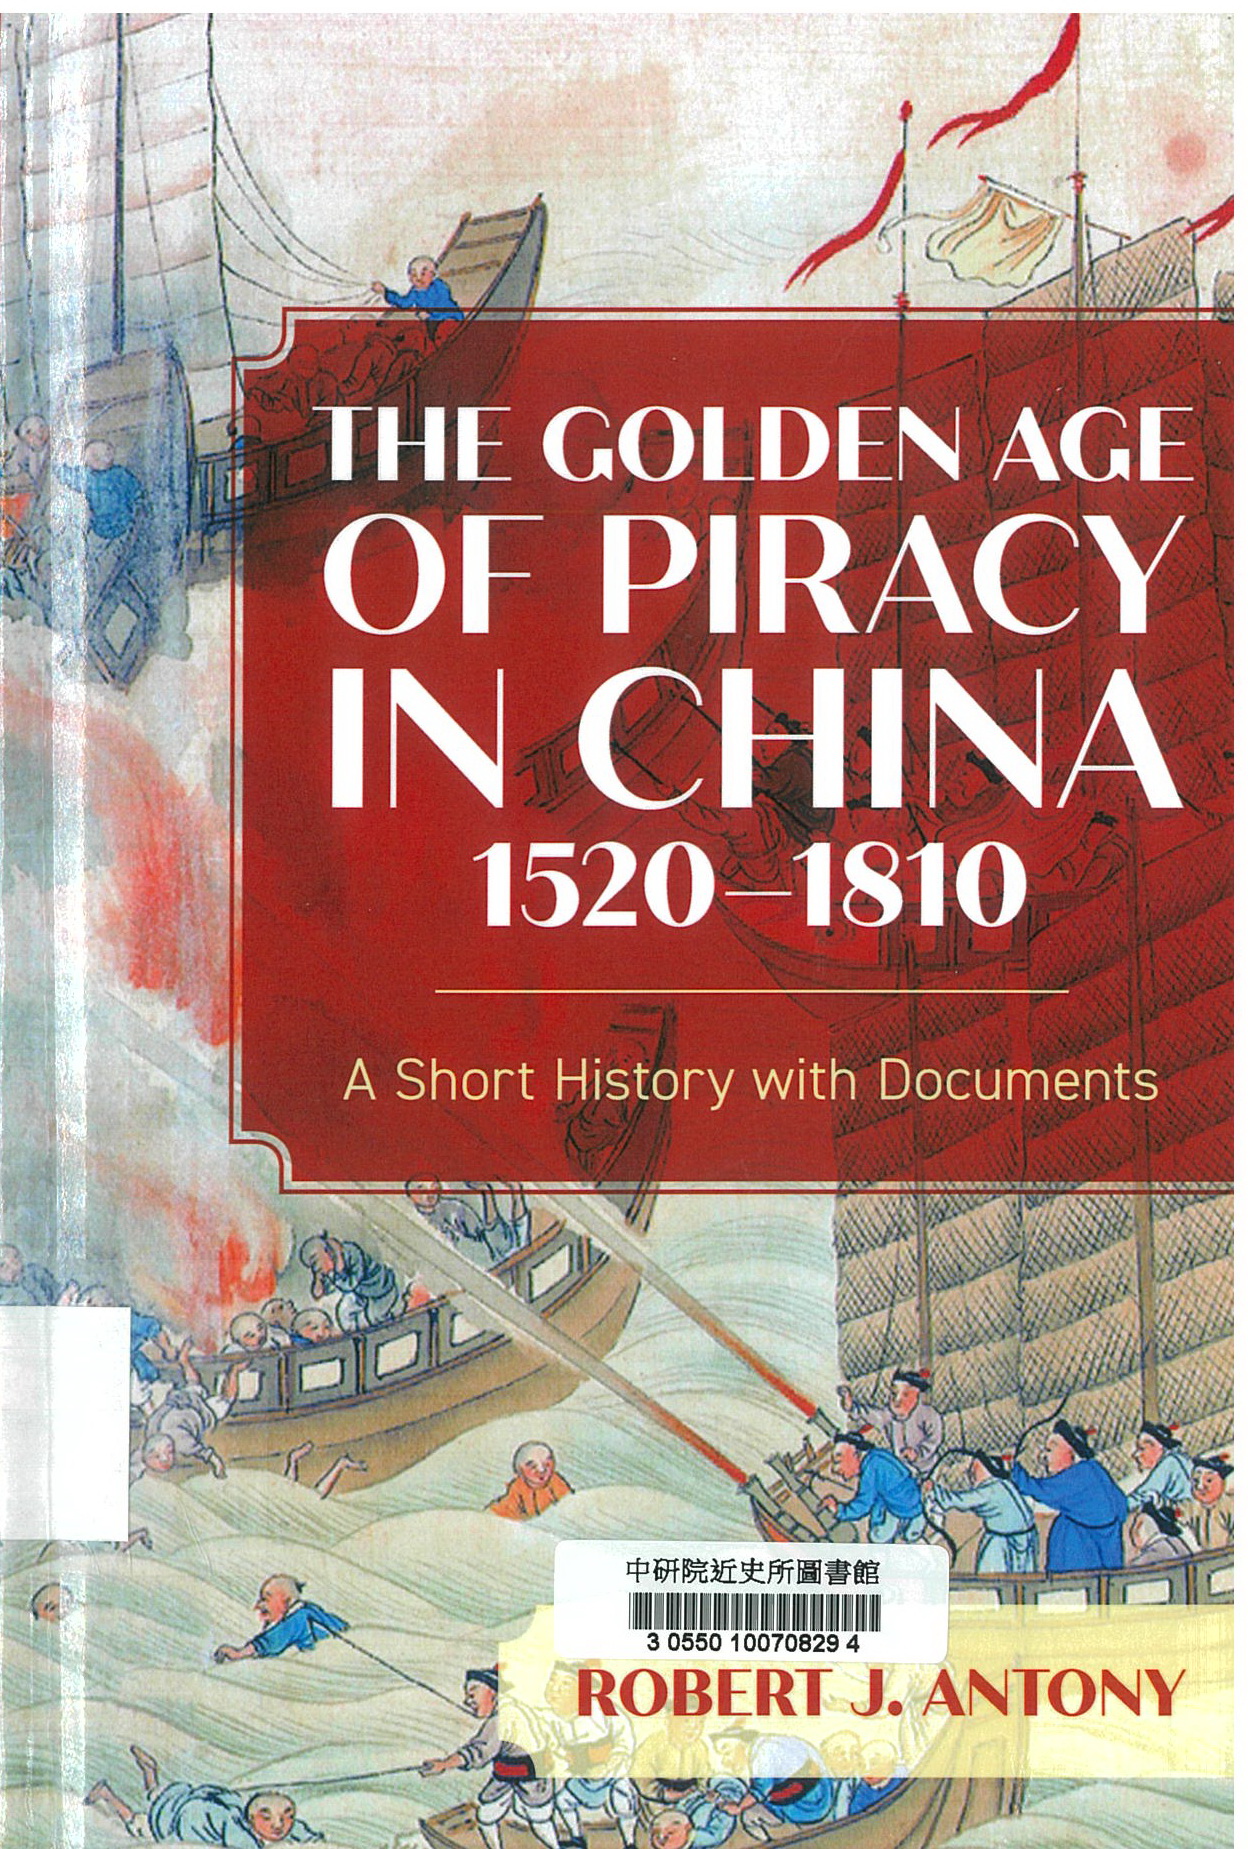 The golden age of piracy in China, 1520-1810 : a short history with documents